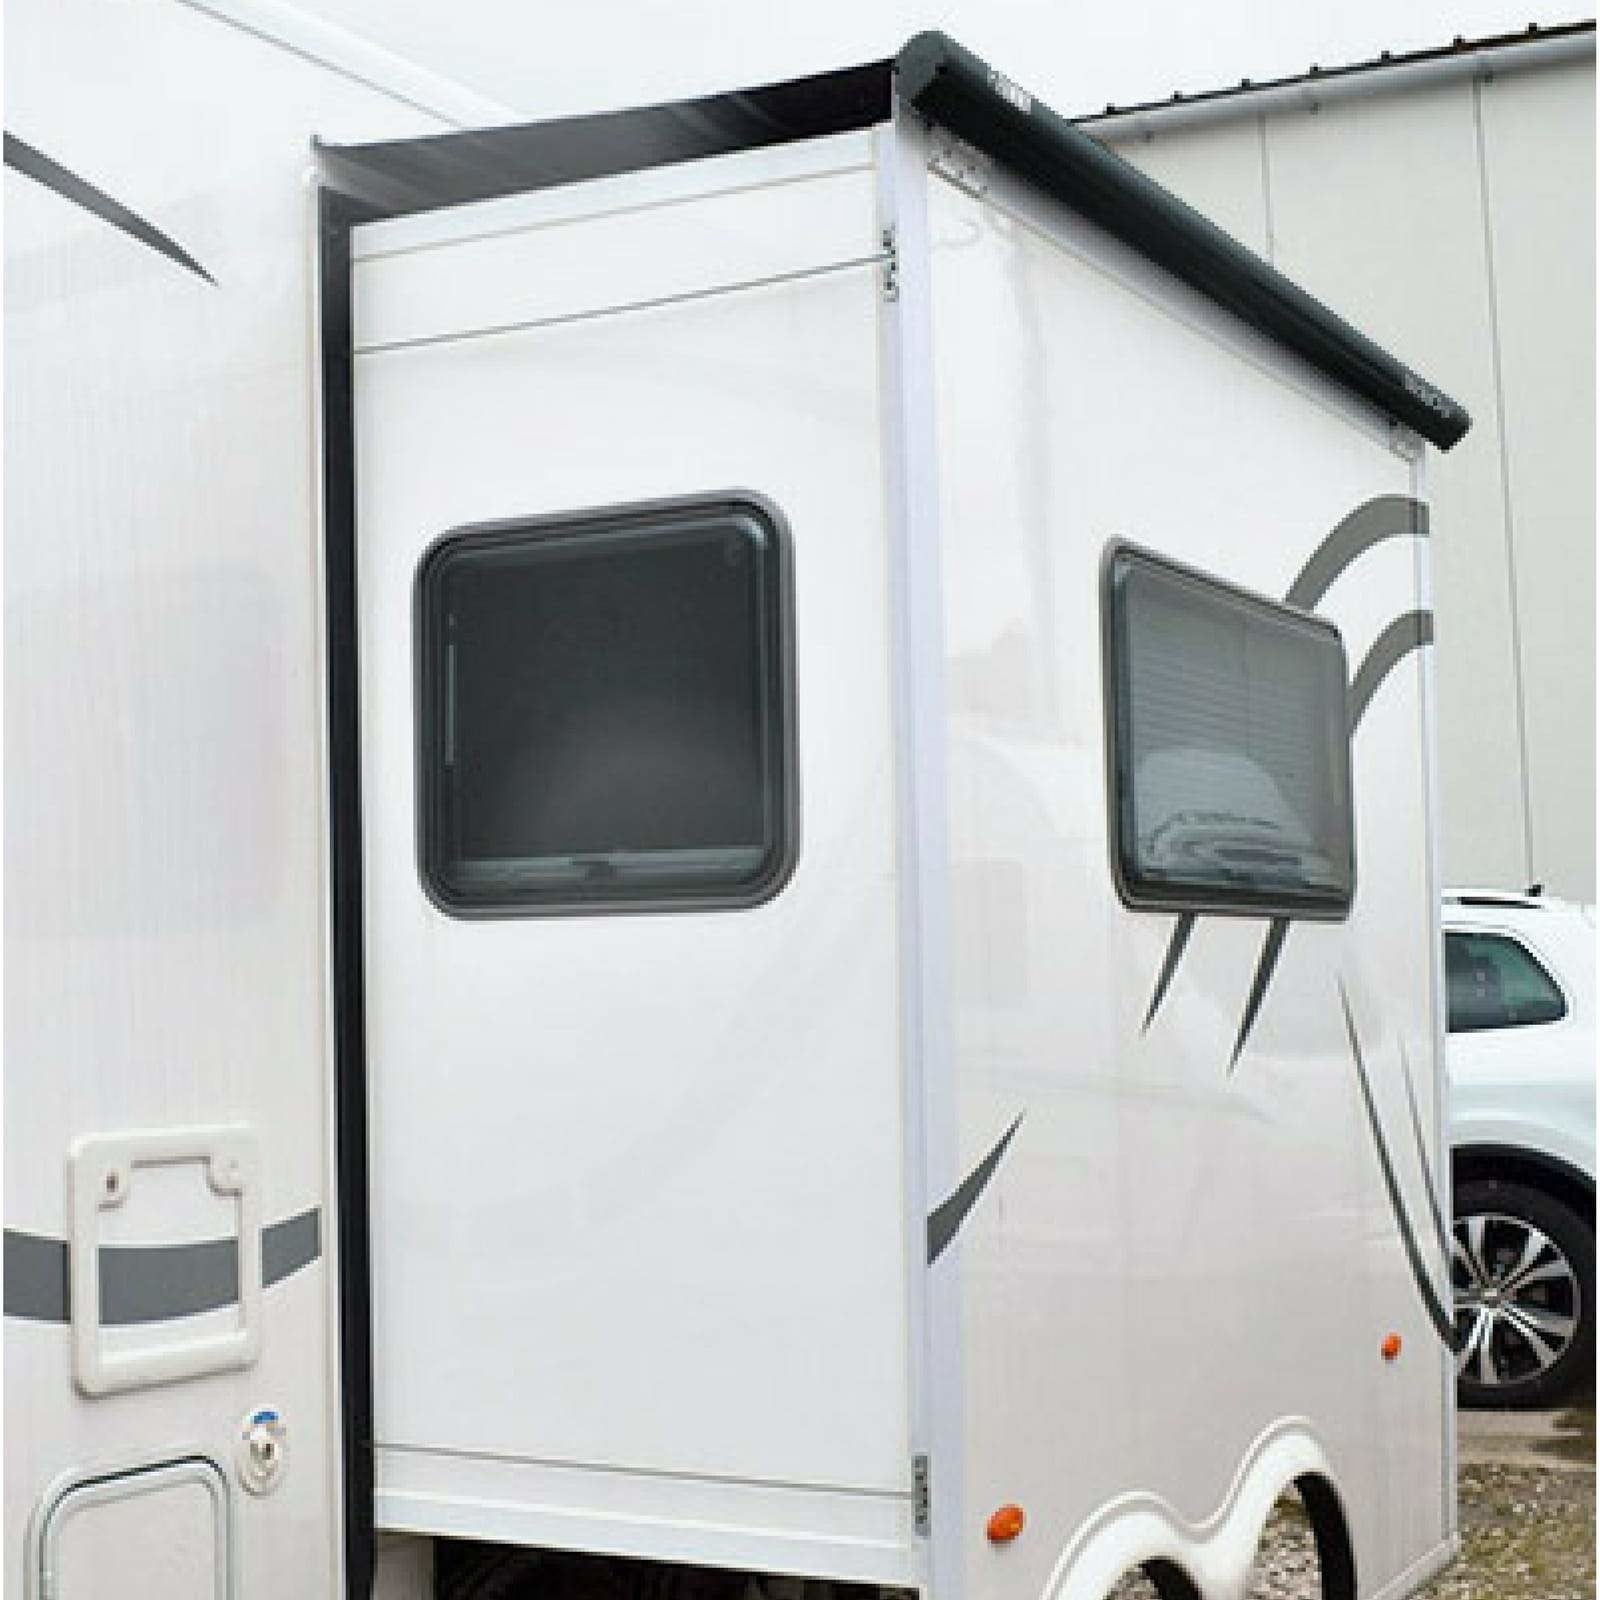 Fiamma Slide Out Polar White Pop-out Wall Awning made by Fiamma. A Motorhome Awnings sold by Quality Caravan Awnings